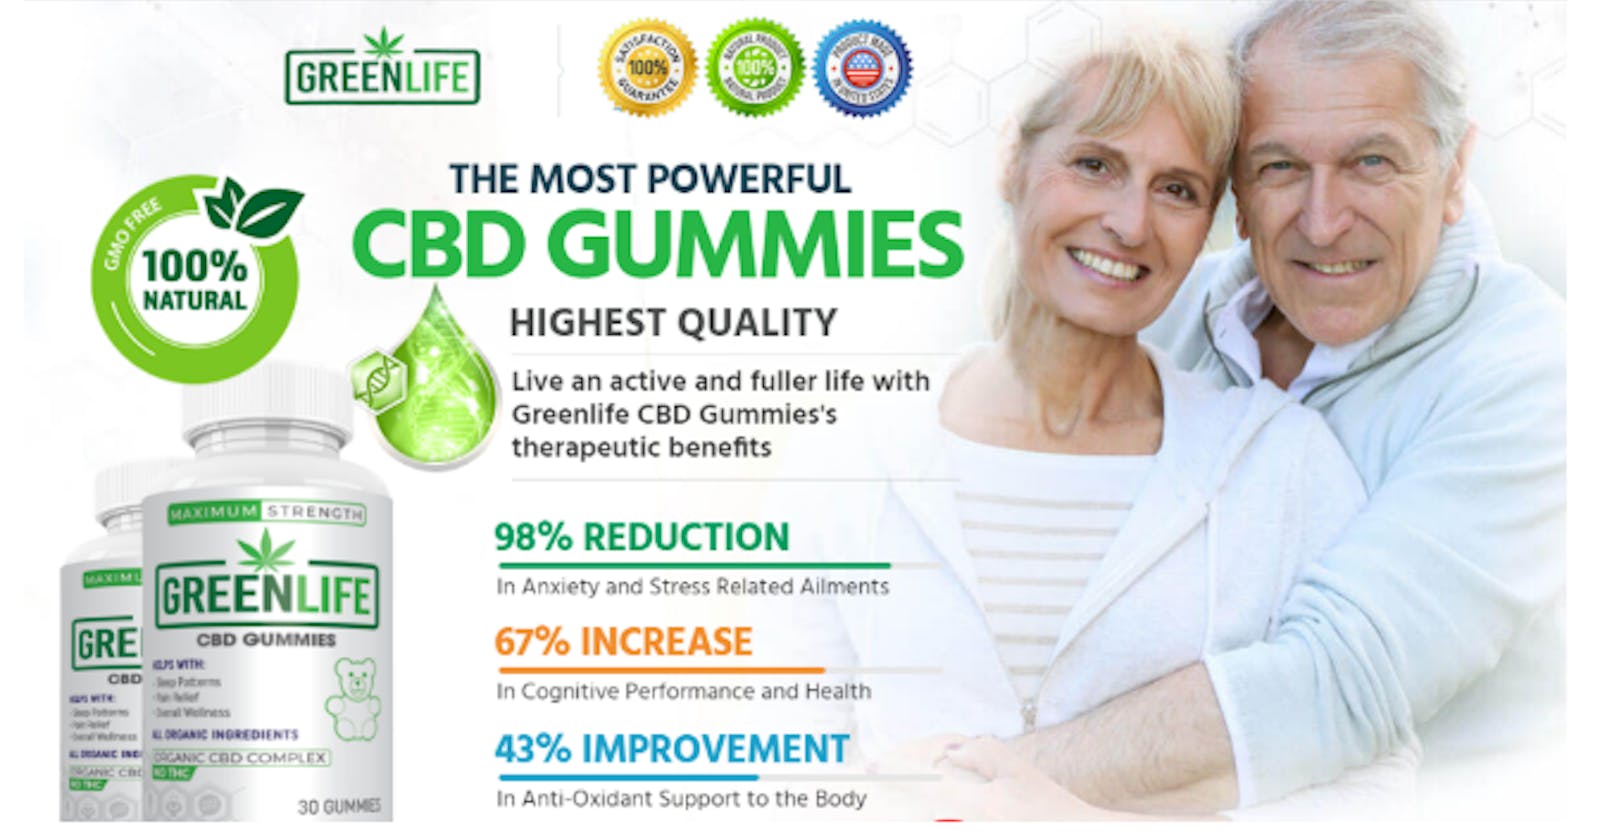 Green Life CBD Gummies (USA) Reviews : Is it Safe for Health? Must Read This!